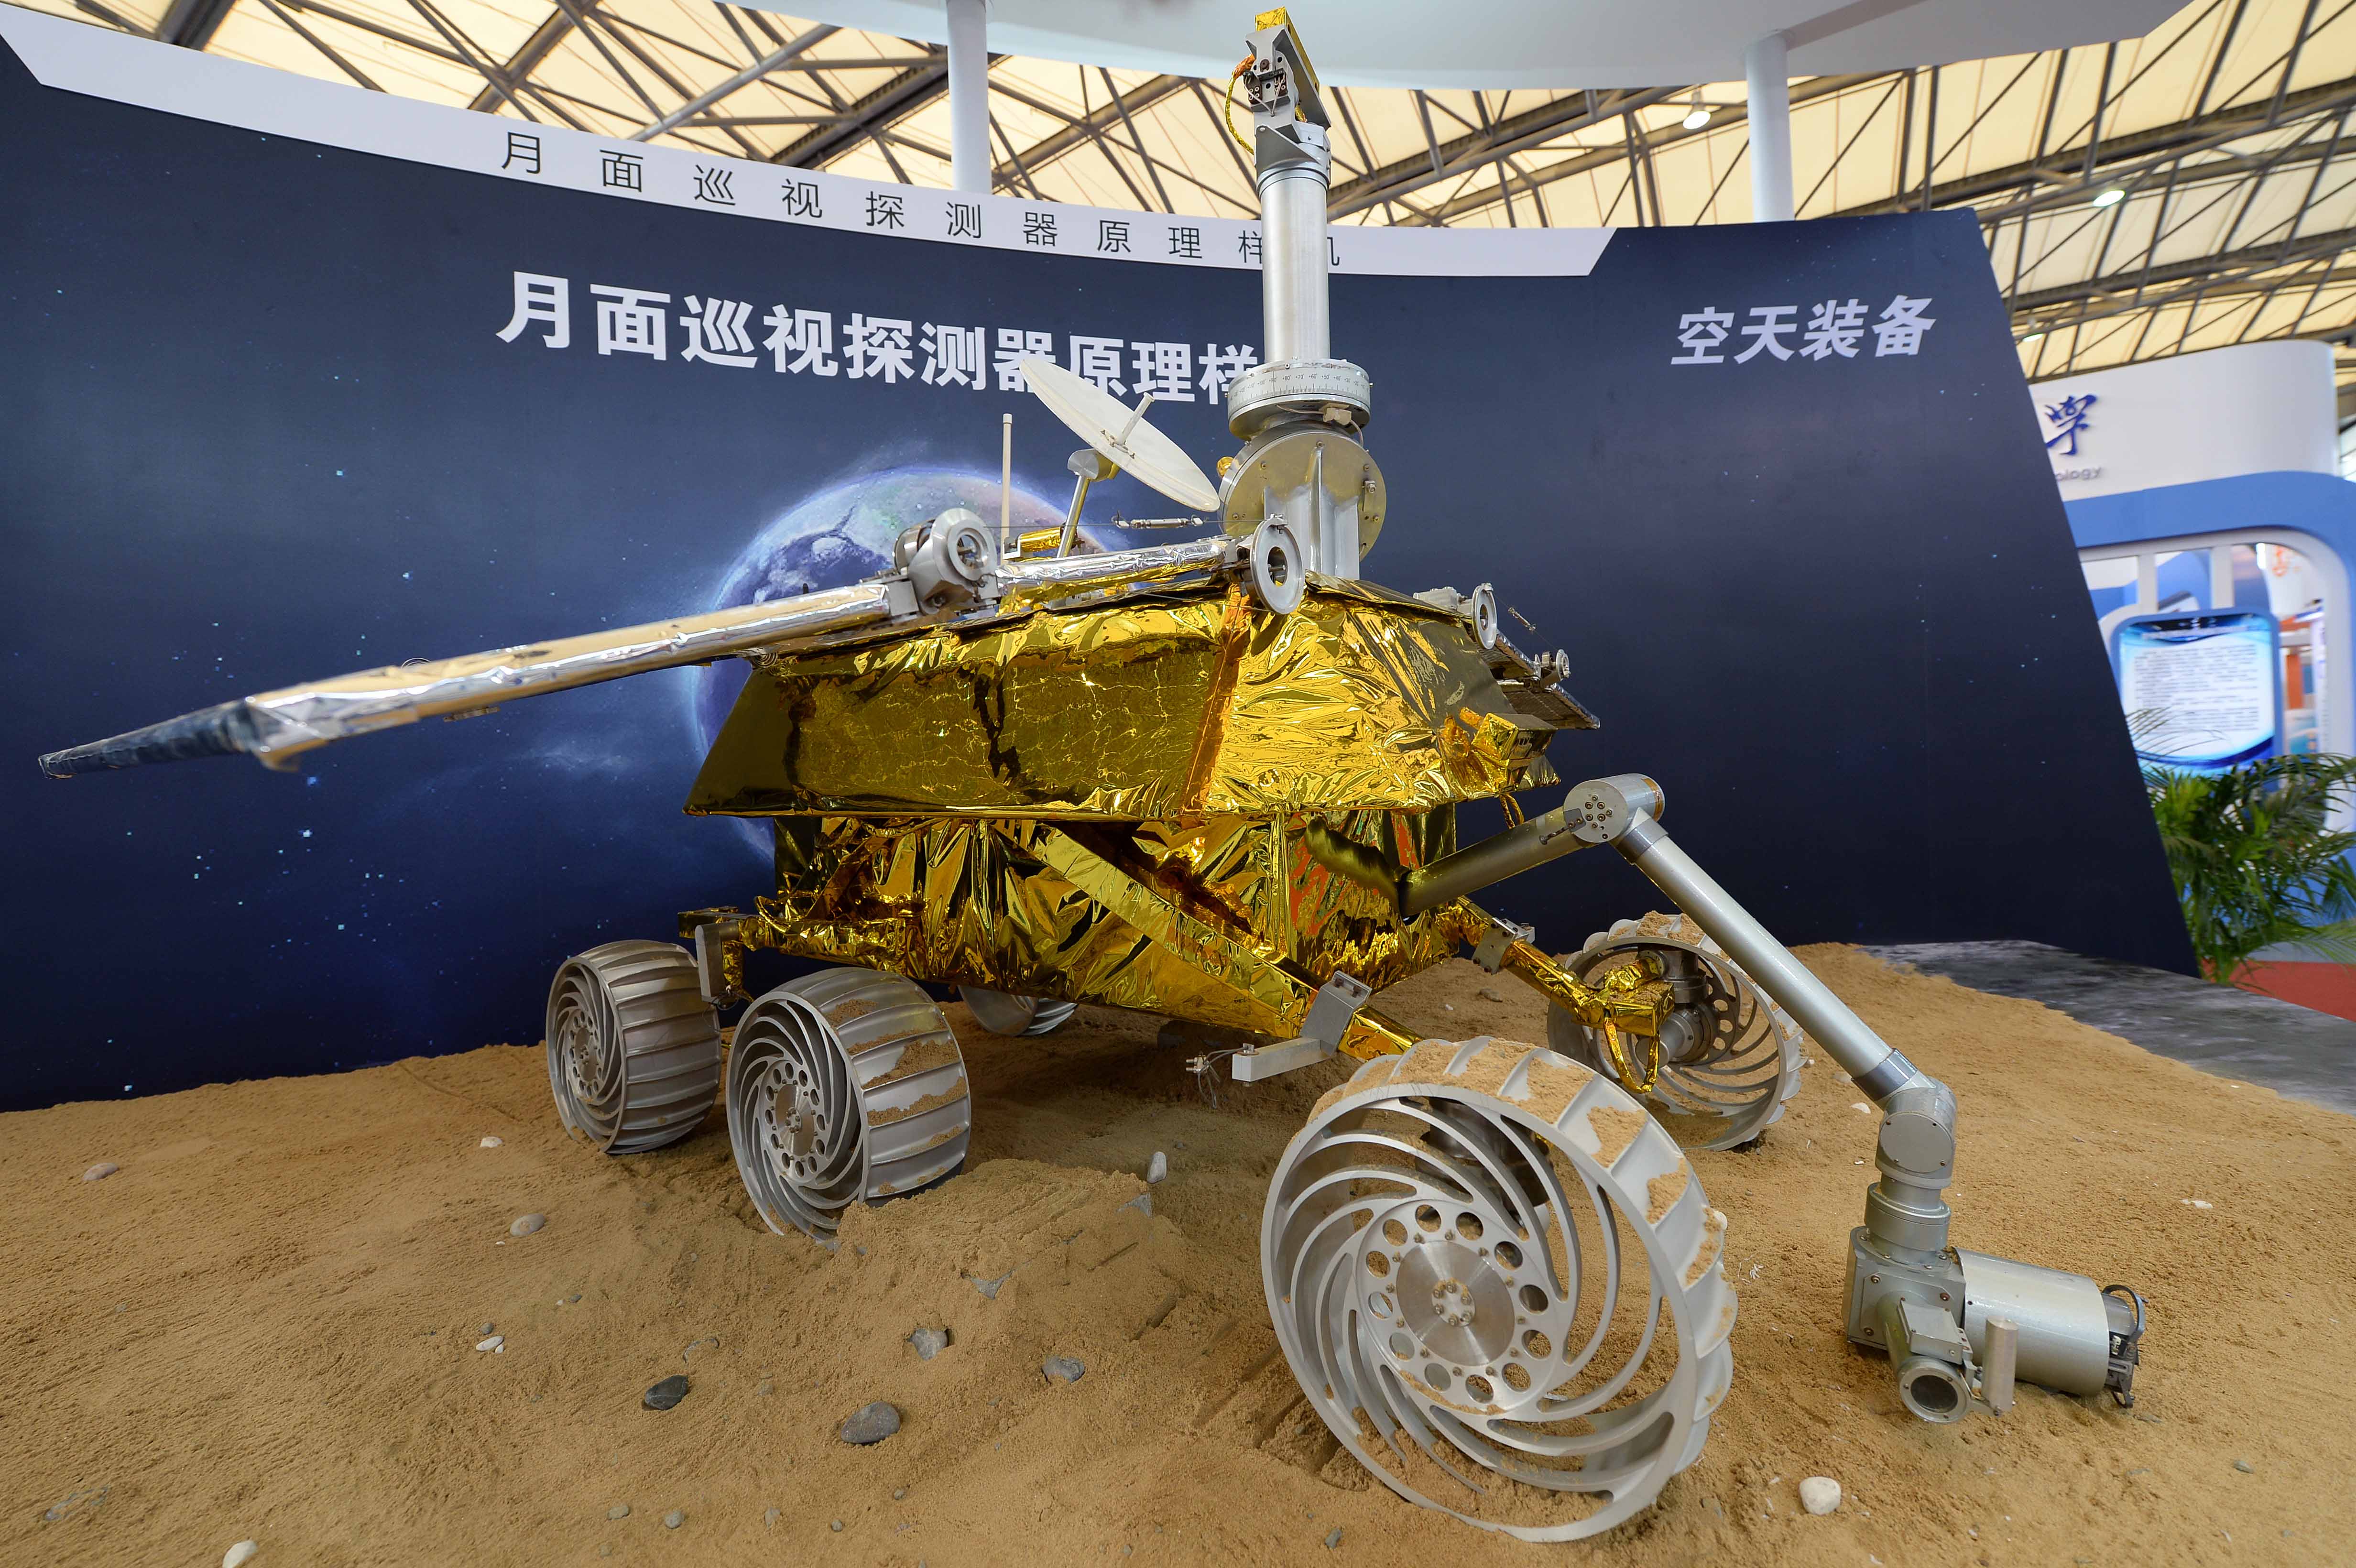 Russia wants to build a moon base with China